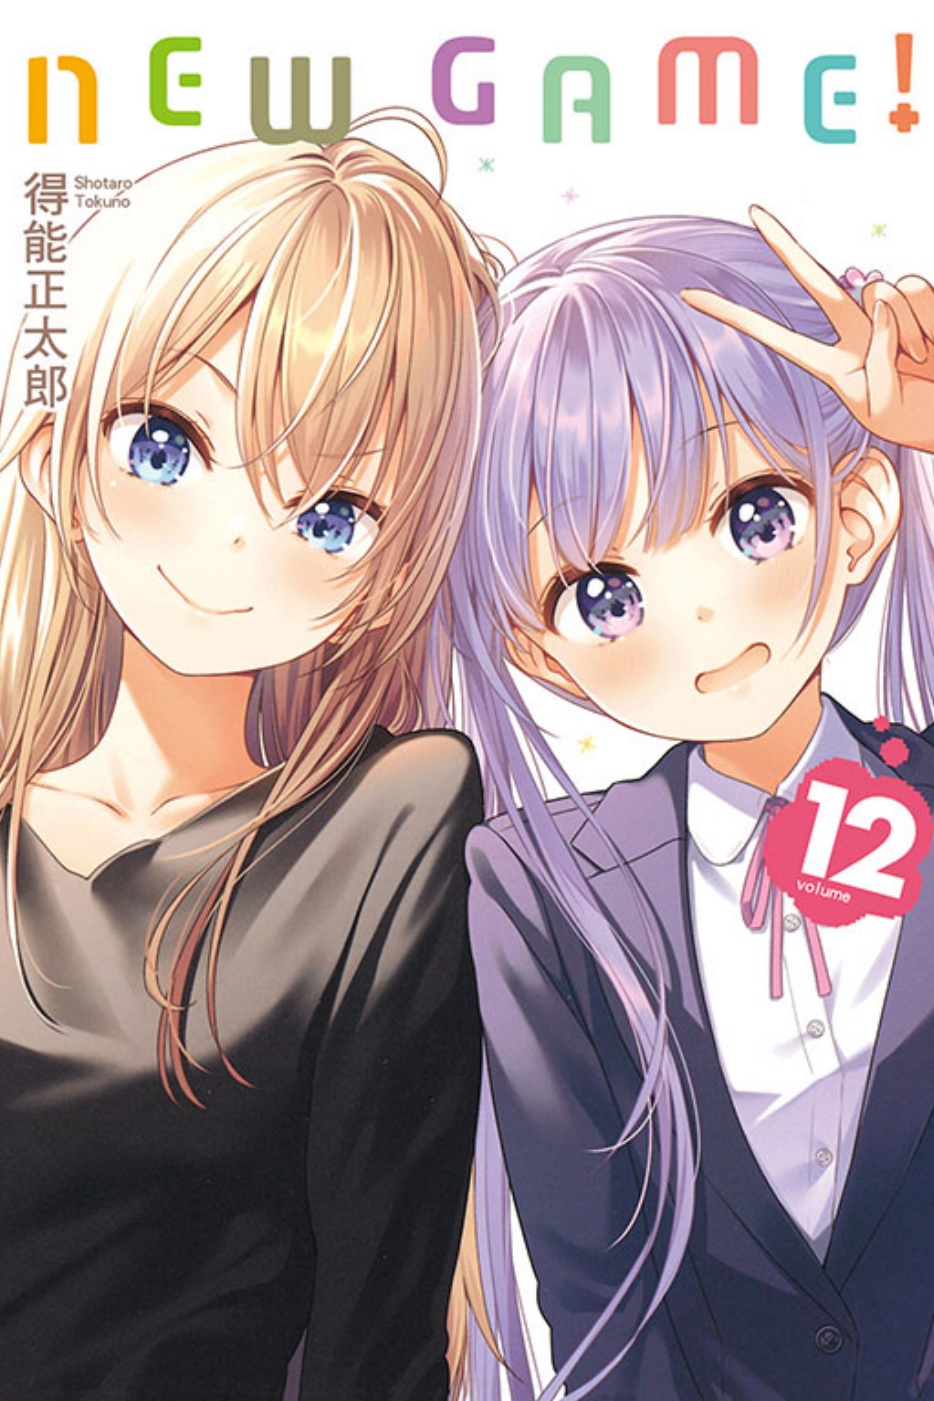 NEW GAME！12